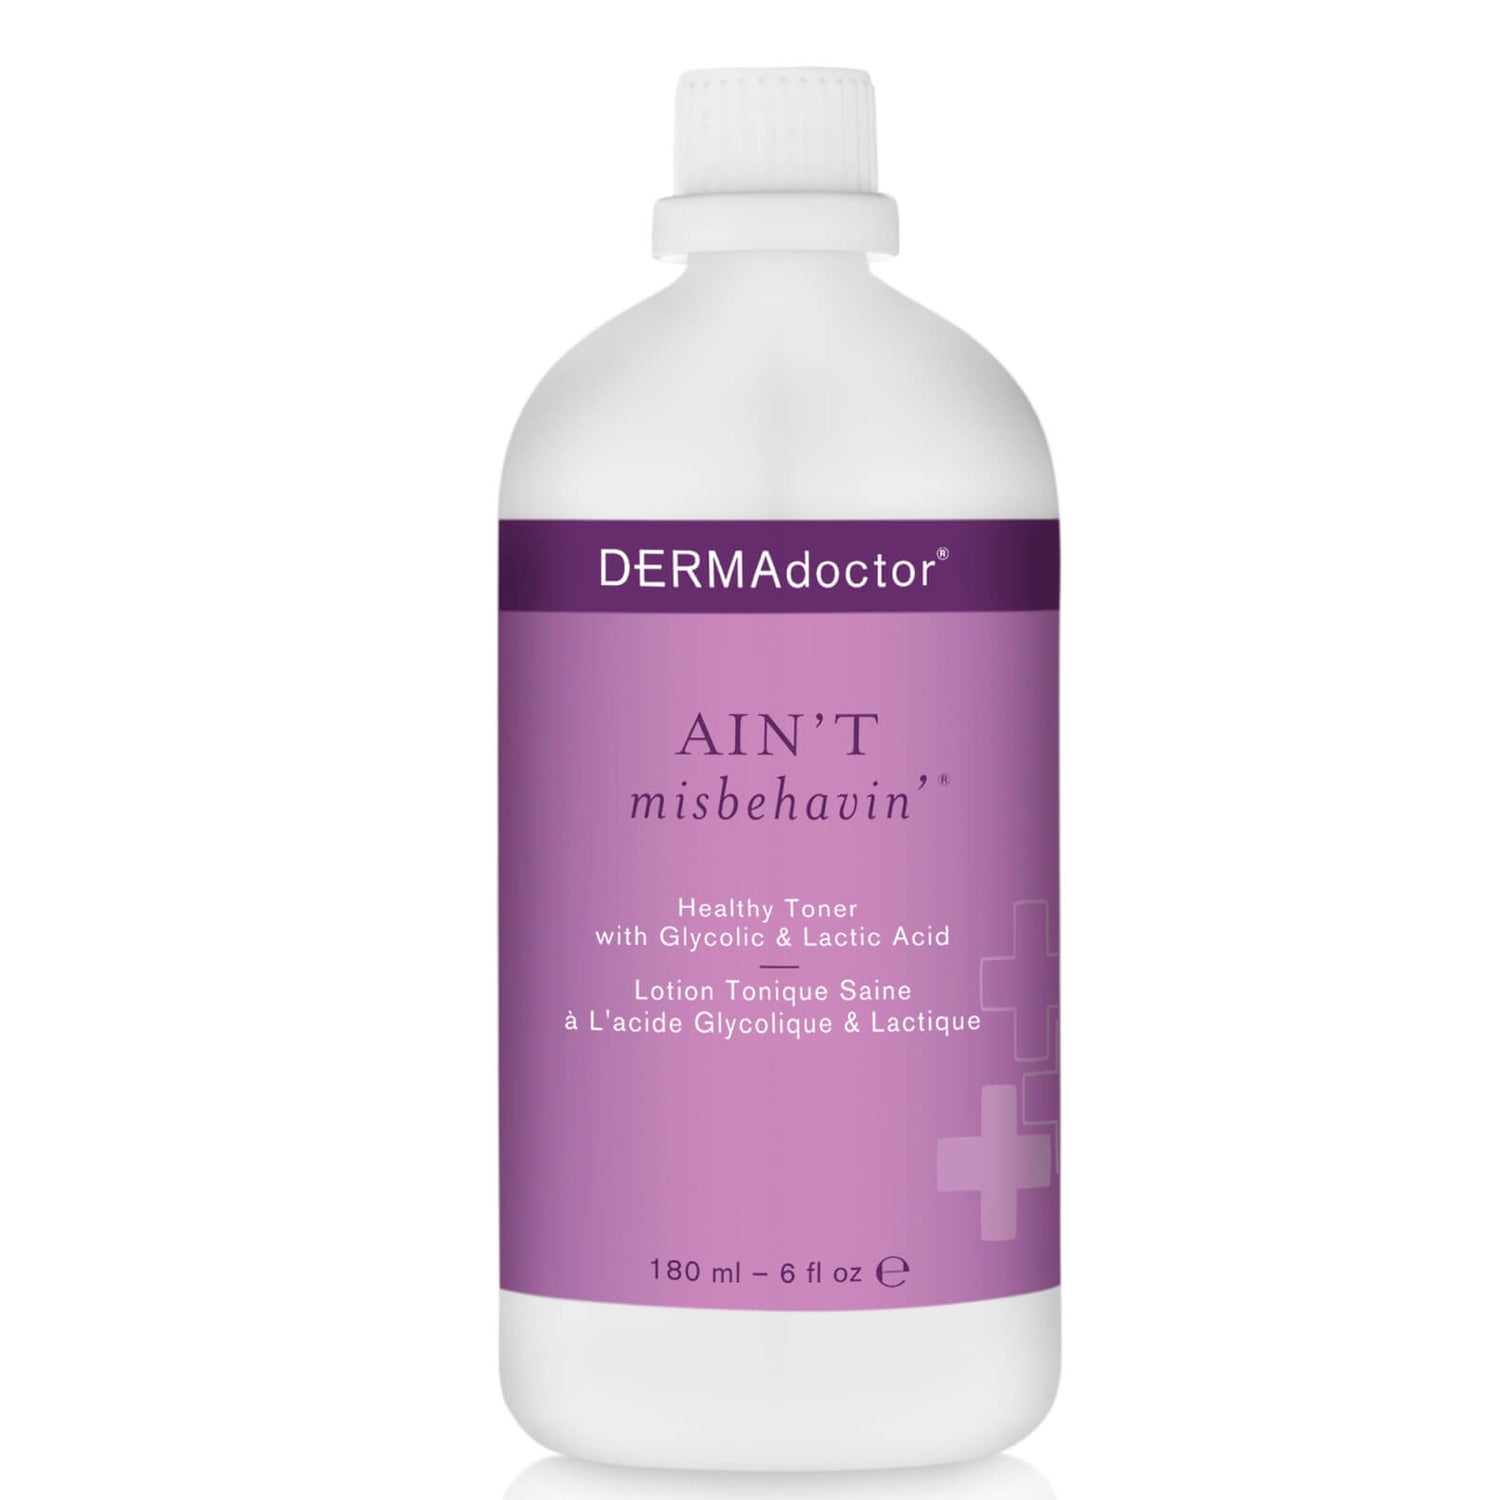 DERMAdoctor Ain't Misbehavin' Healthy Toner with Glycolic and Lactic Acid